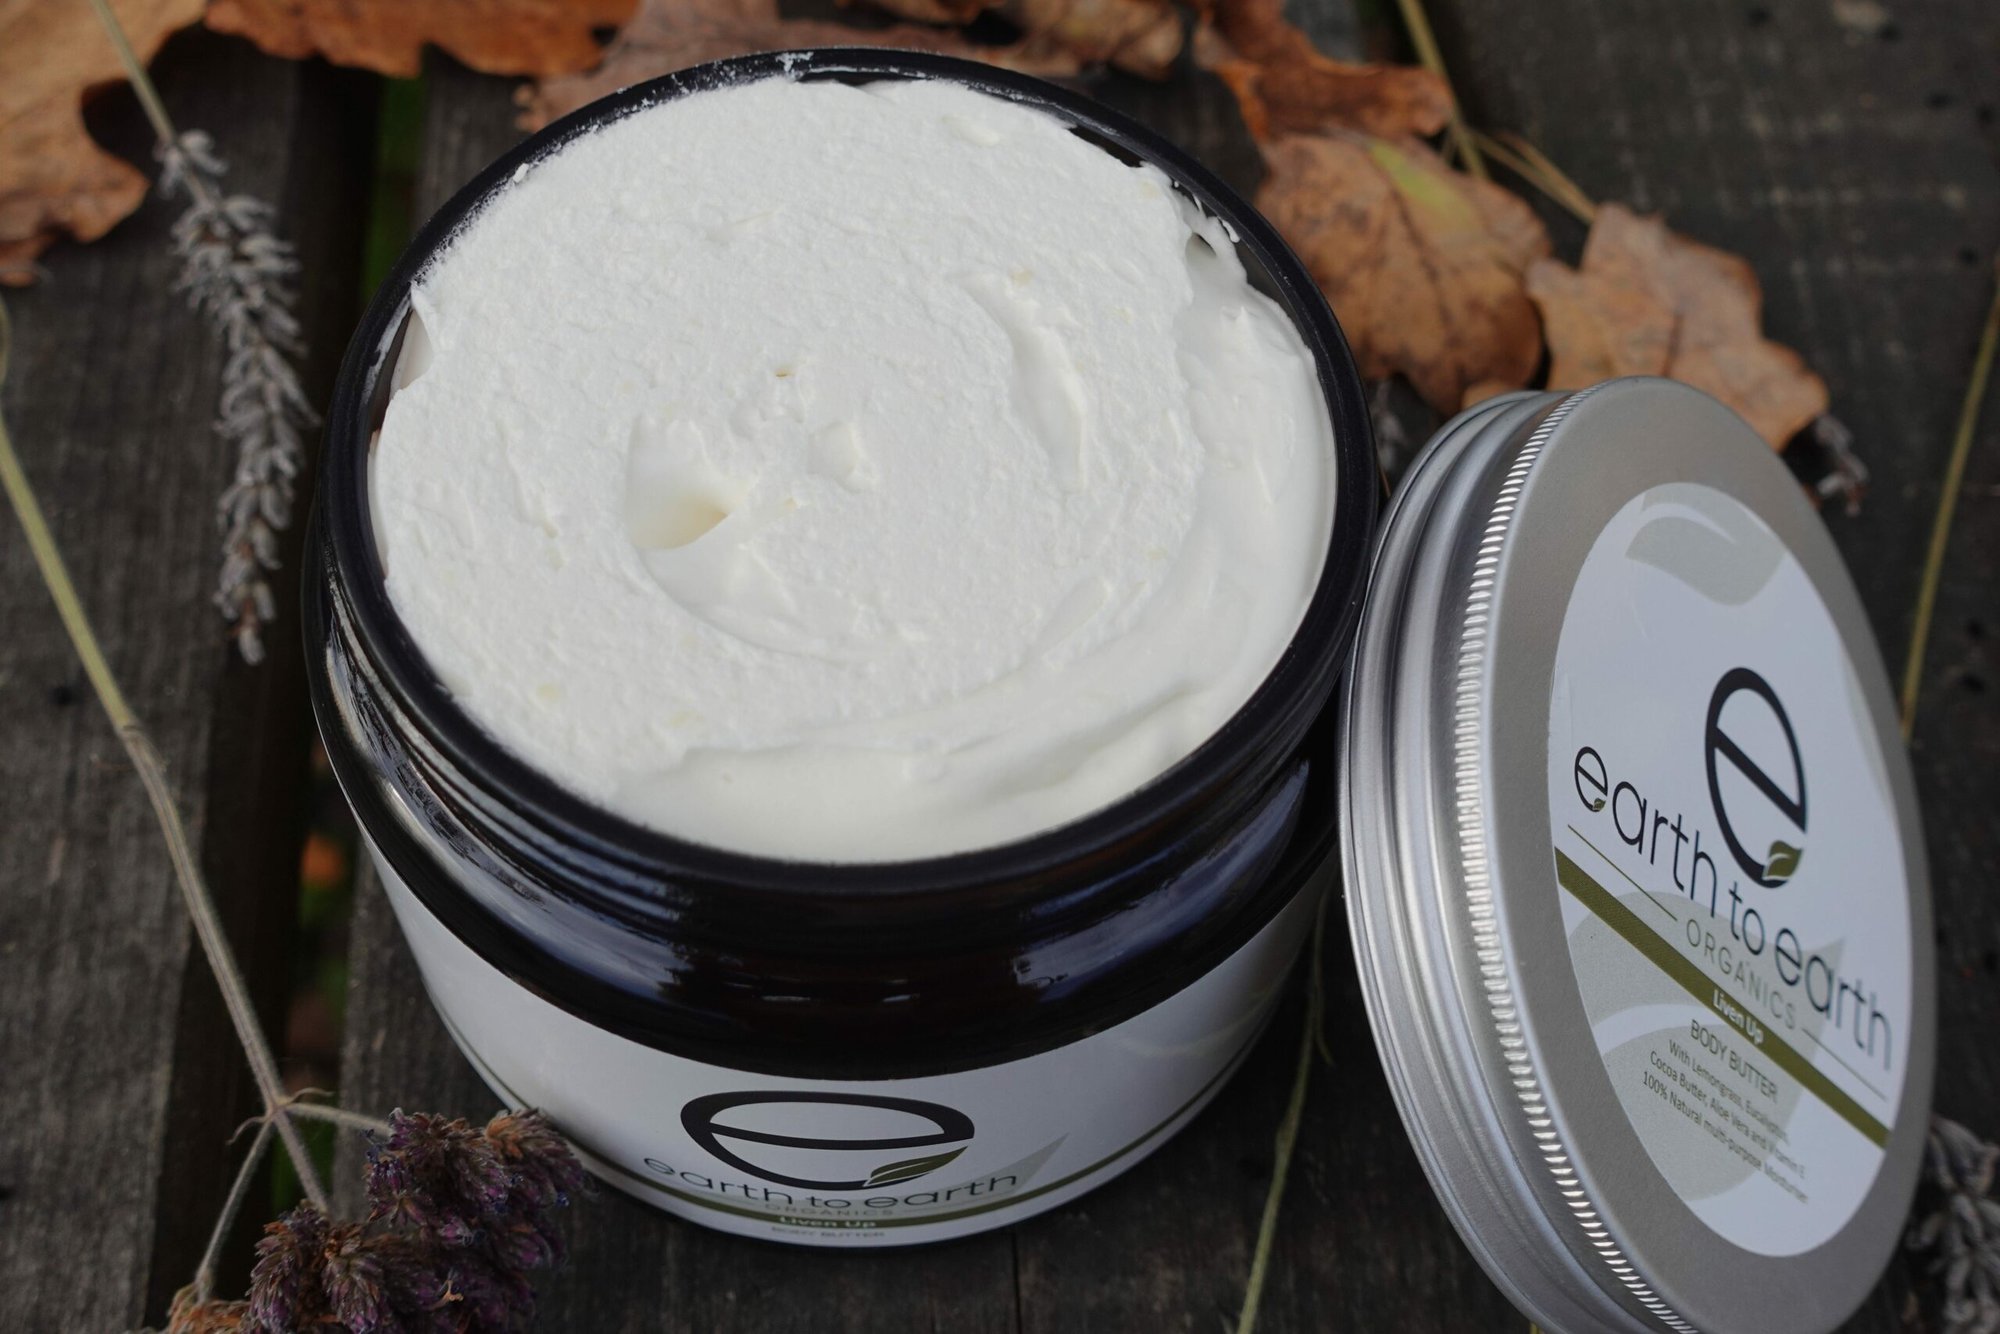 Liven Up Body Butter